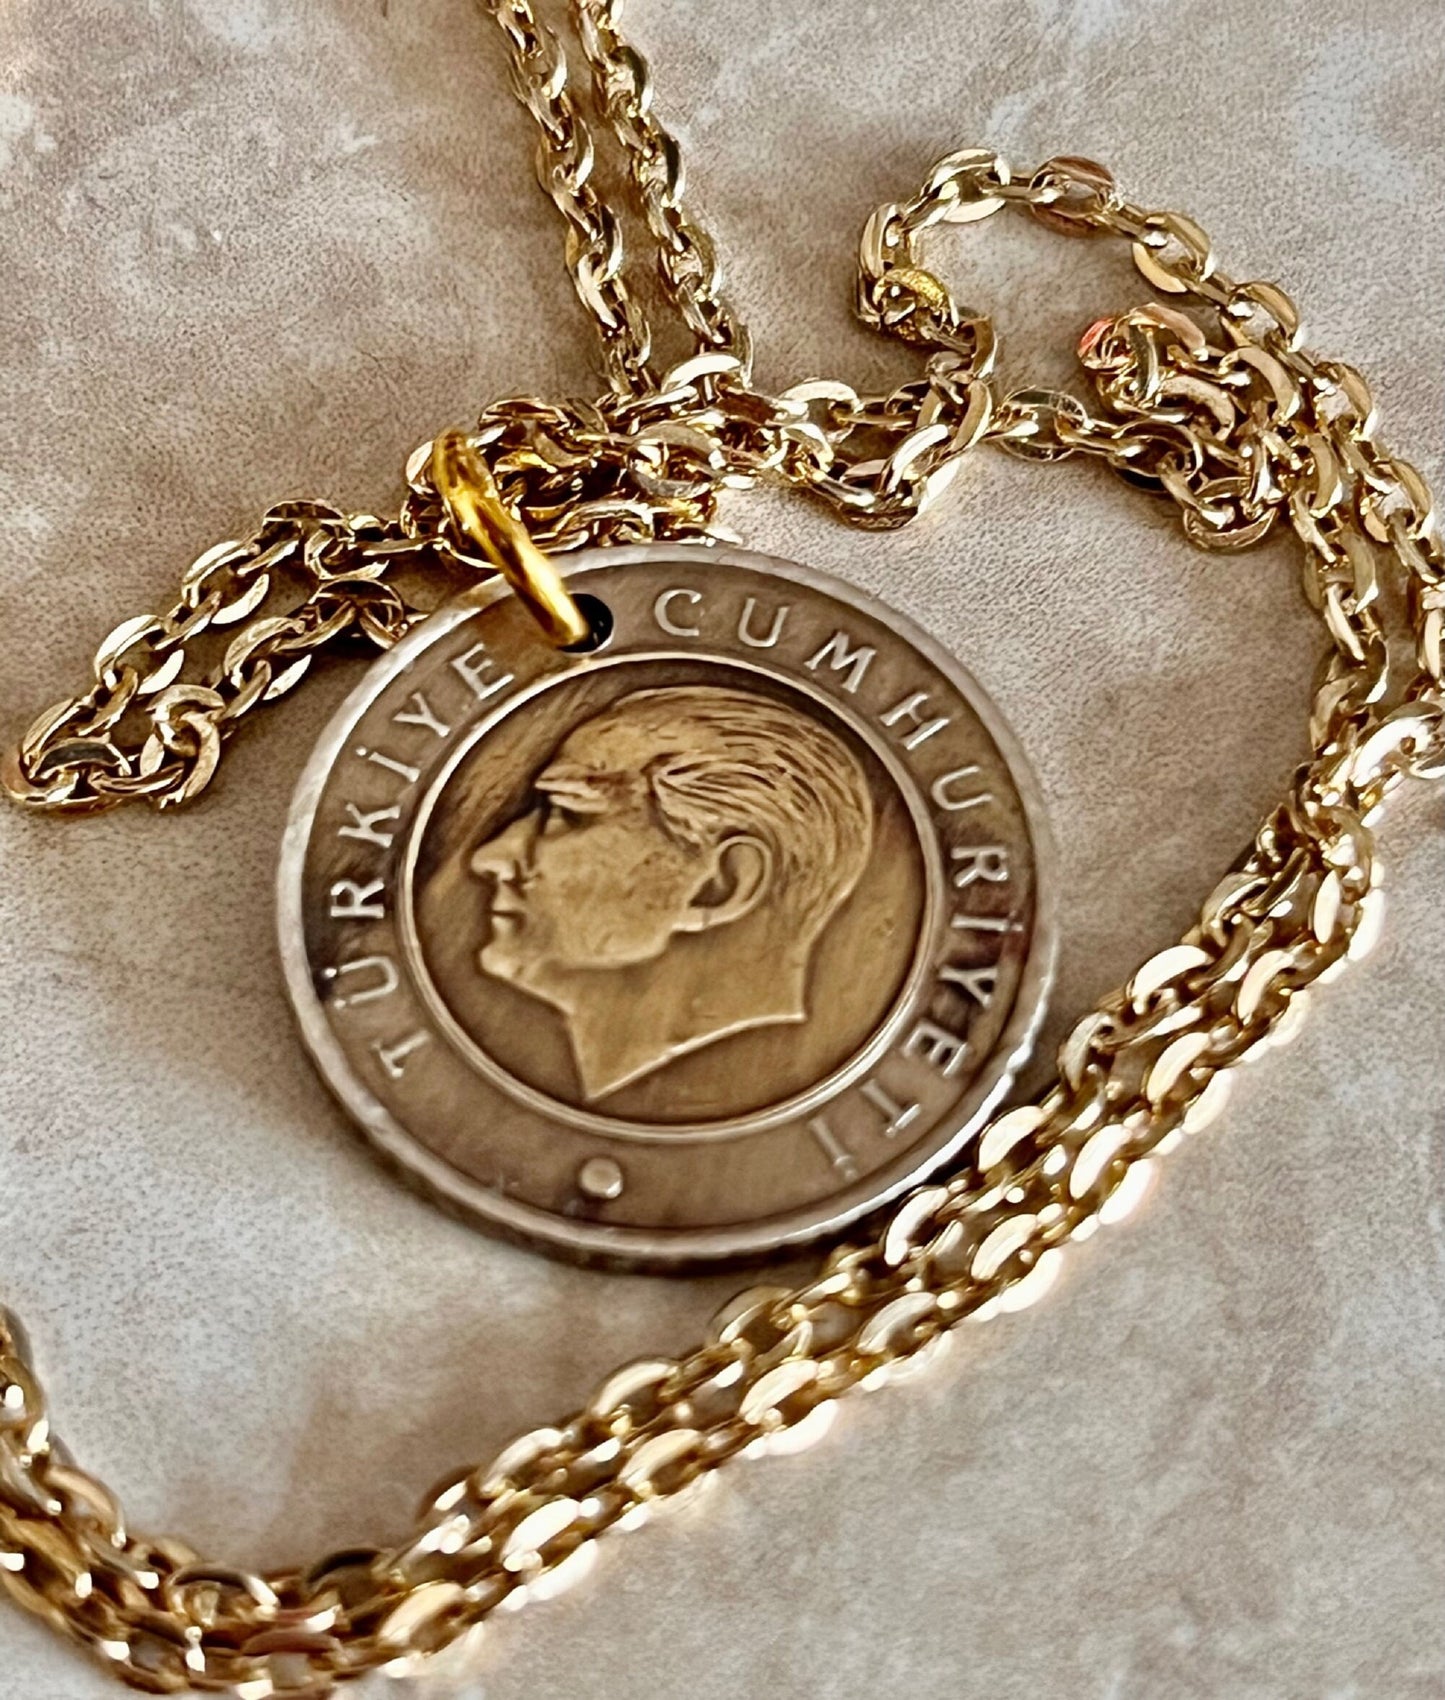 Turkey Coin Necklace Turkish 50 Kurus Pendant Personal Old Vintage Handmade Jewelry Gift Friend Charm For Him Her World Coin Collector